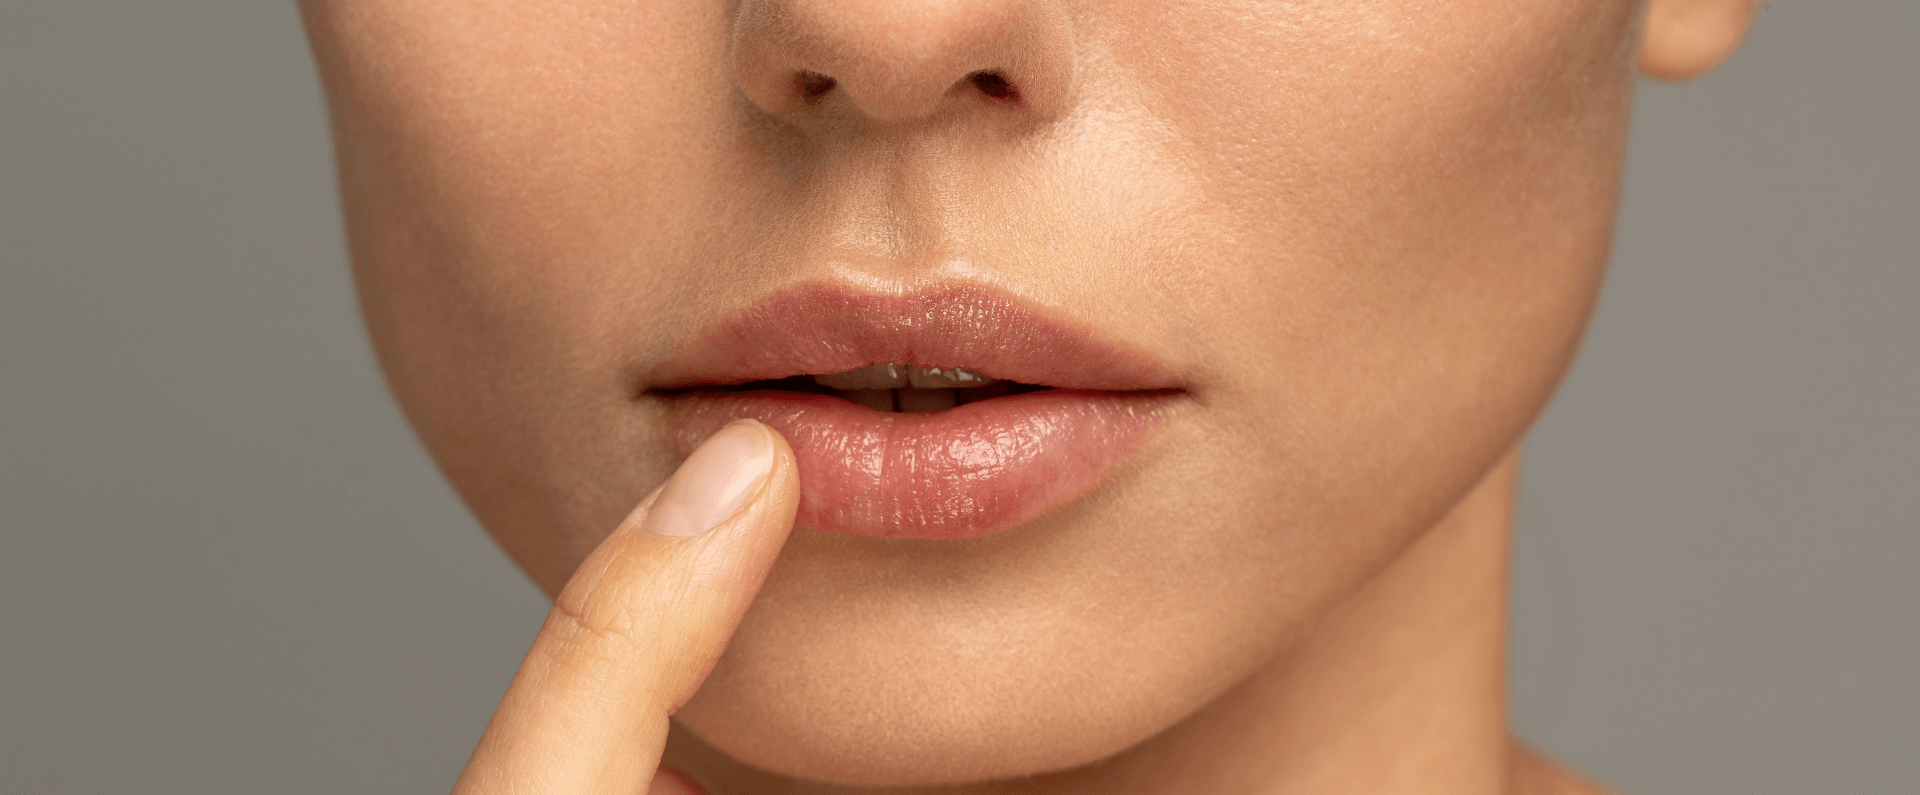 Woman with full lips after getting lip fillers at DermaMedica, Marlow